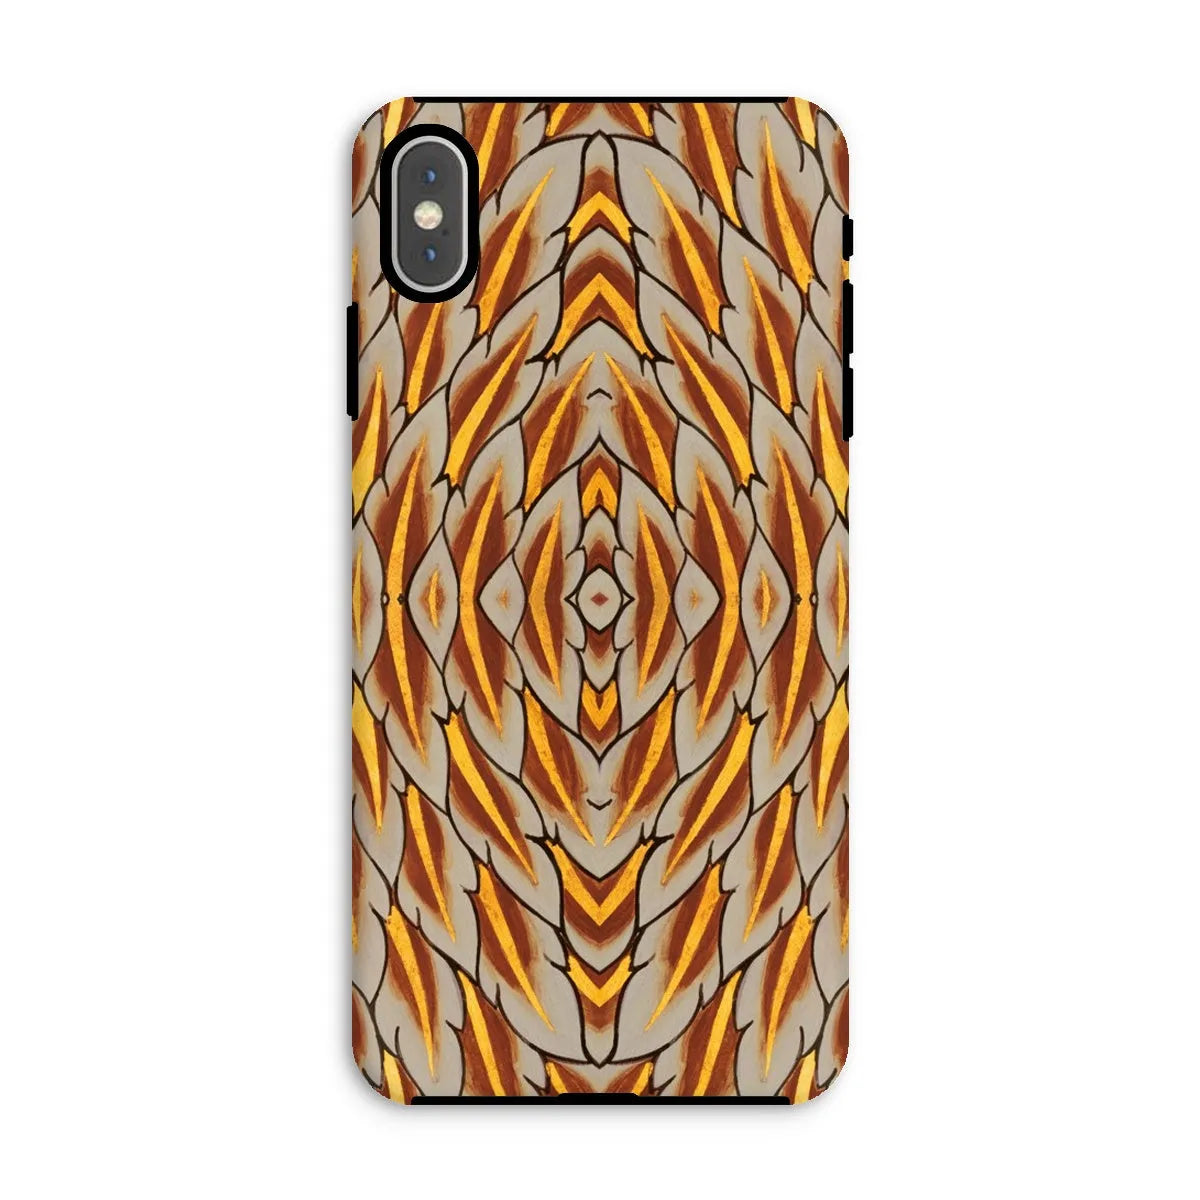 Featherweight Champion Art Phone Case - Thai Garuda Feathers - Iphone Xs Max / Matte - Mobile Phone Cases - Aesthetic